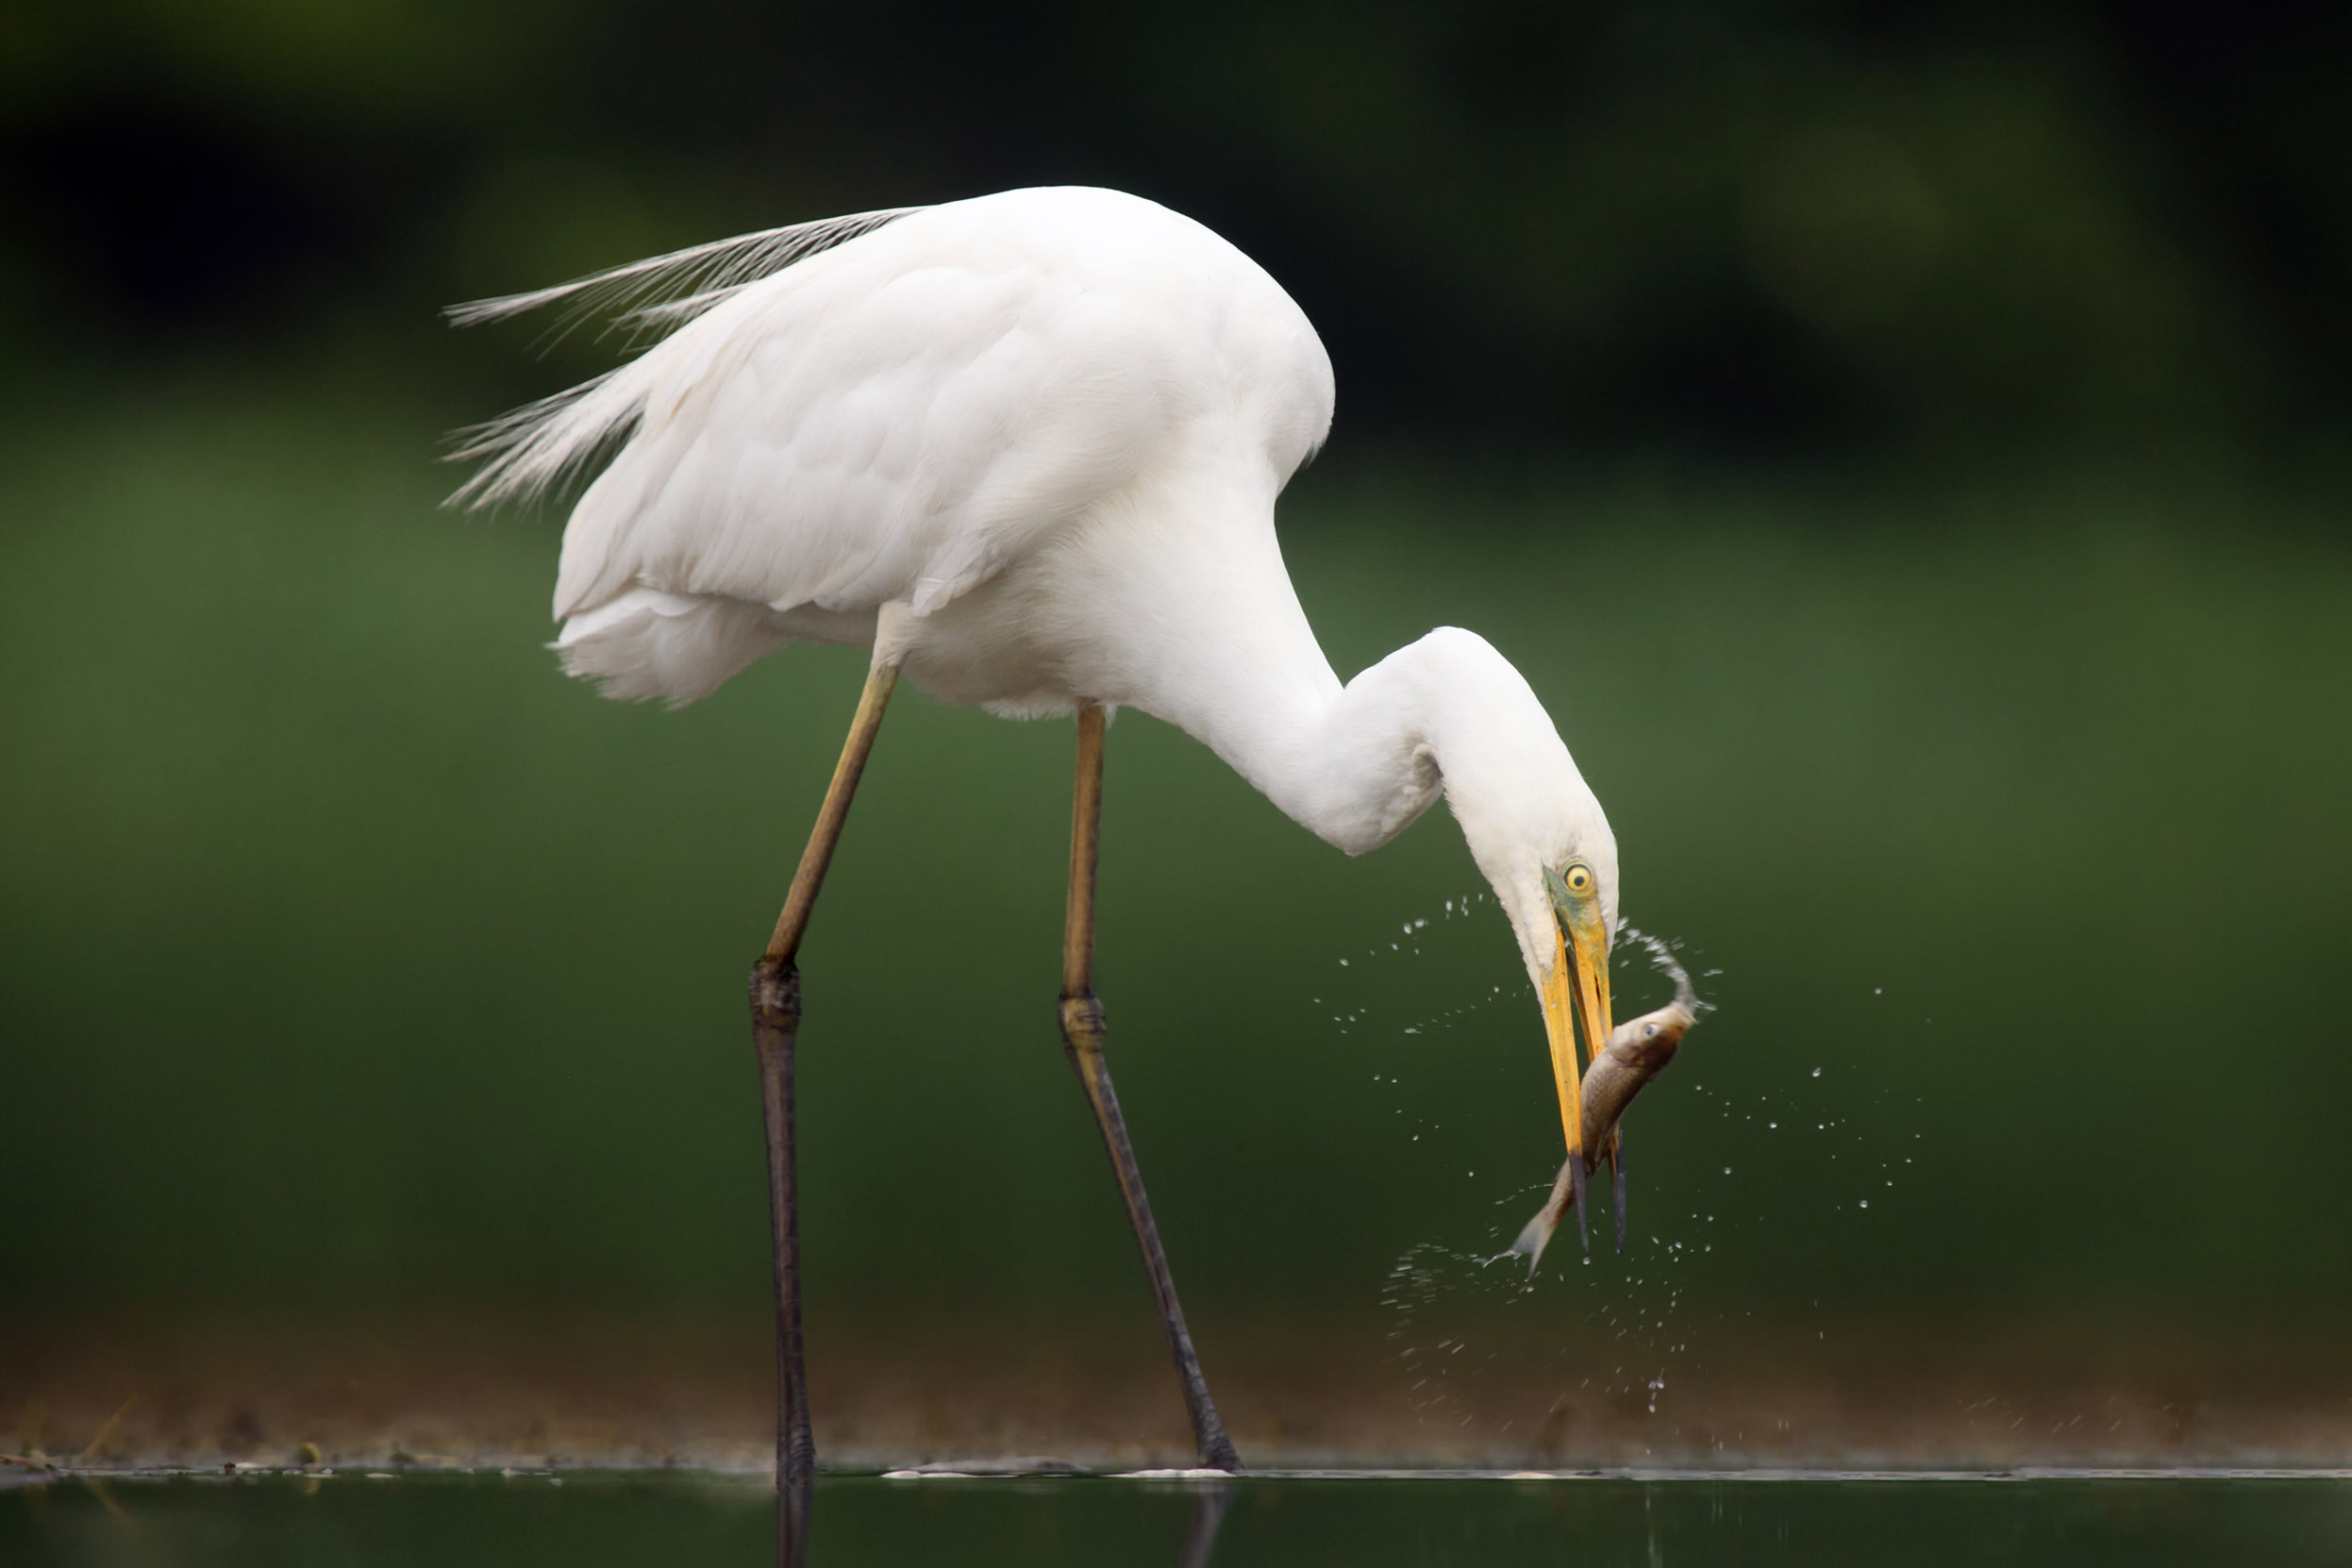 A Great White Egret stood in shallow waters with a fish in their beak.